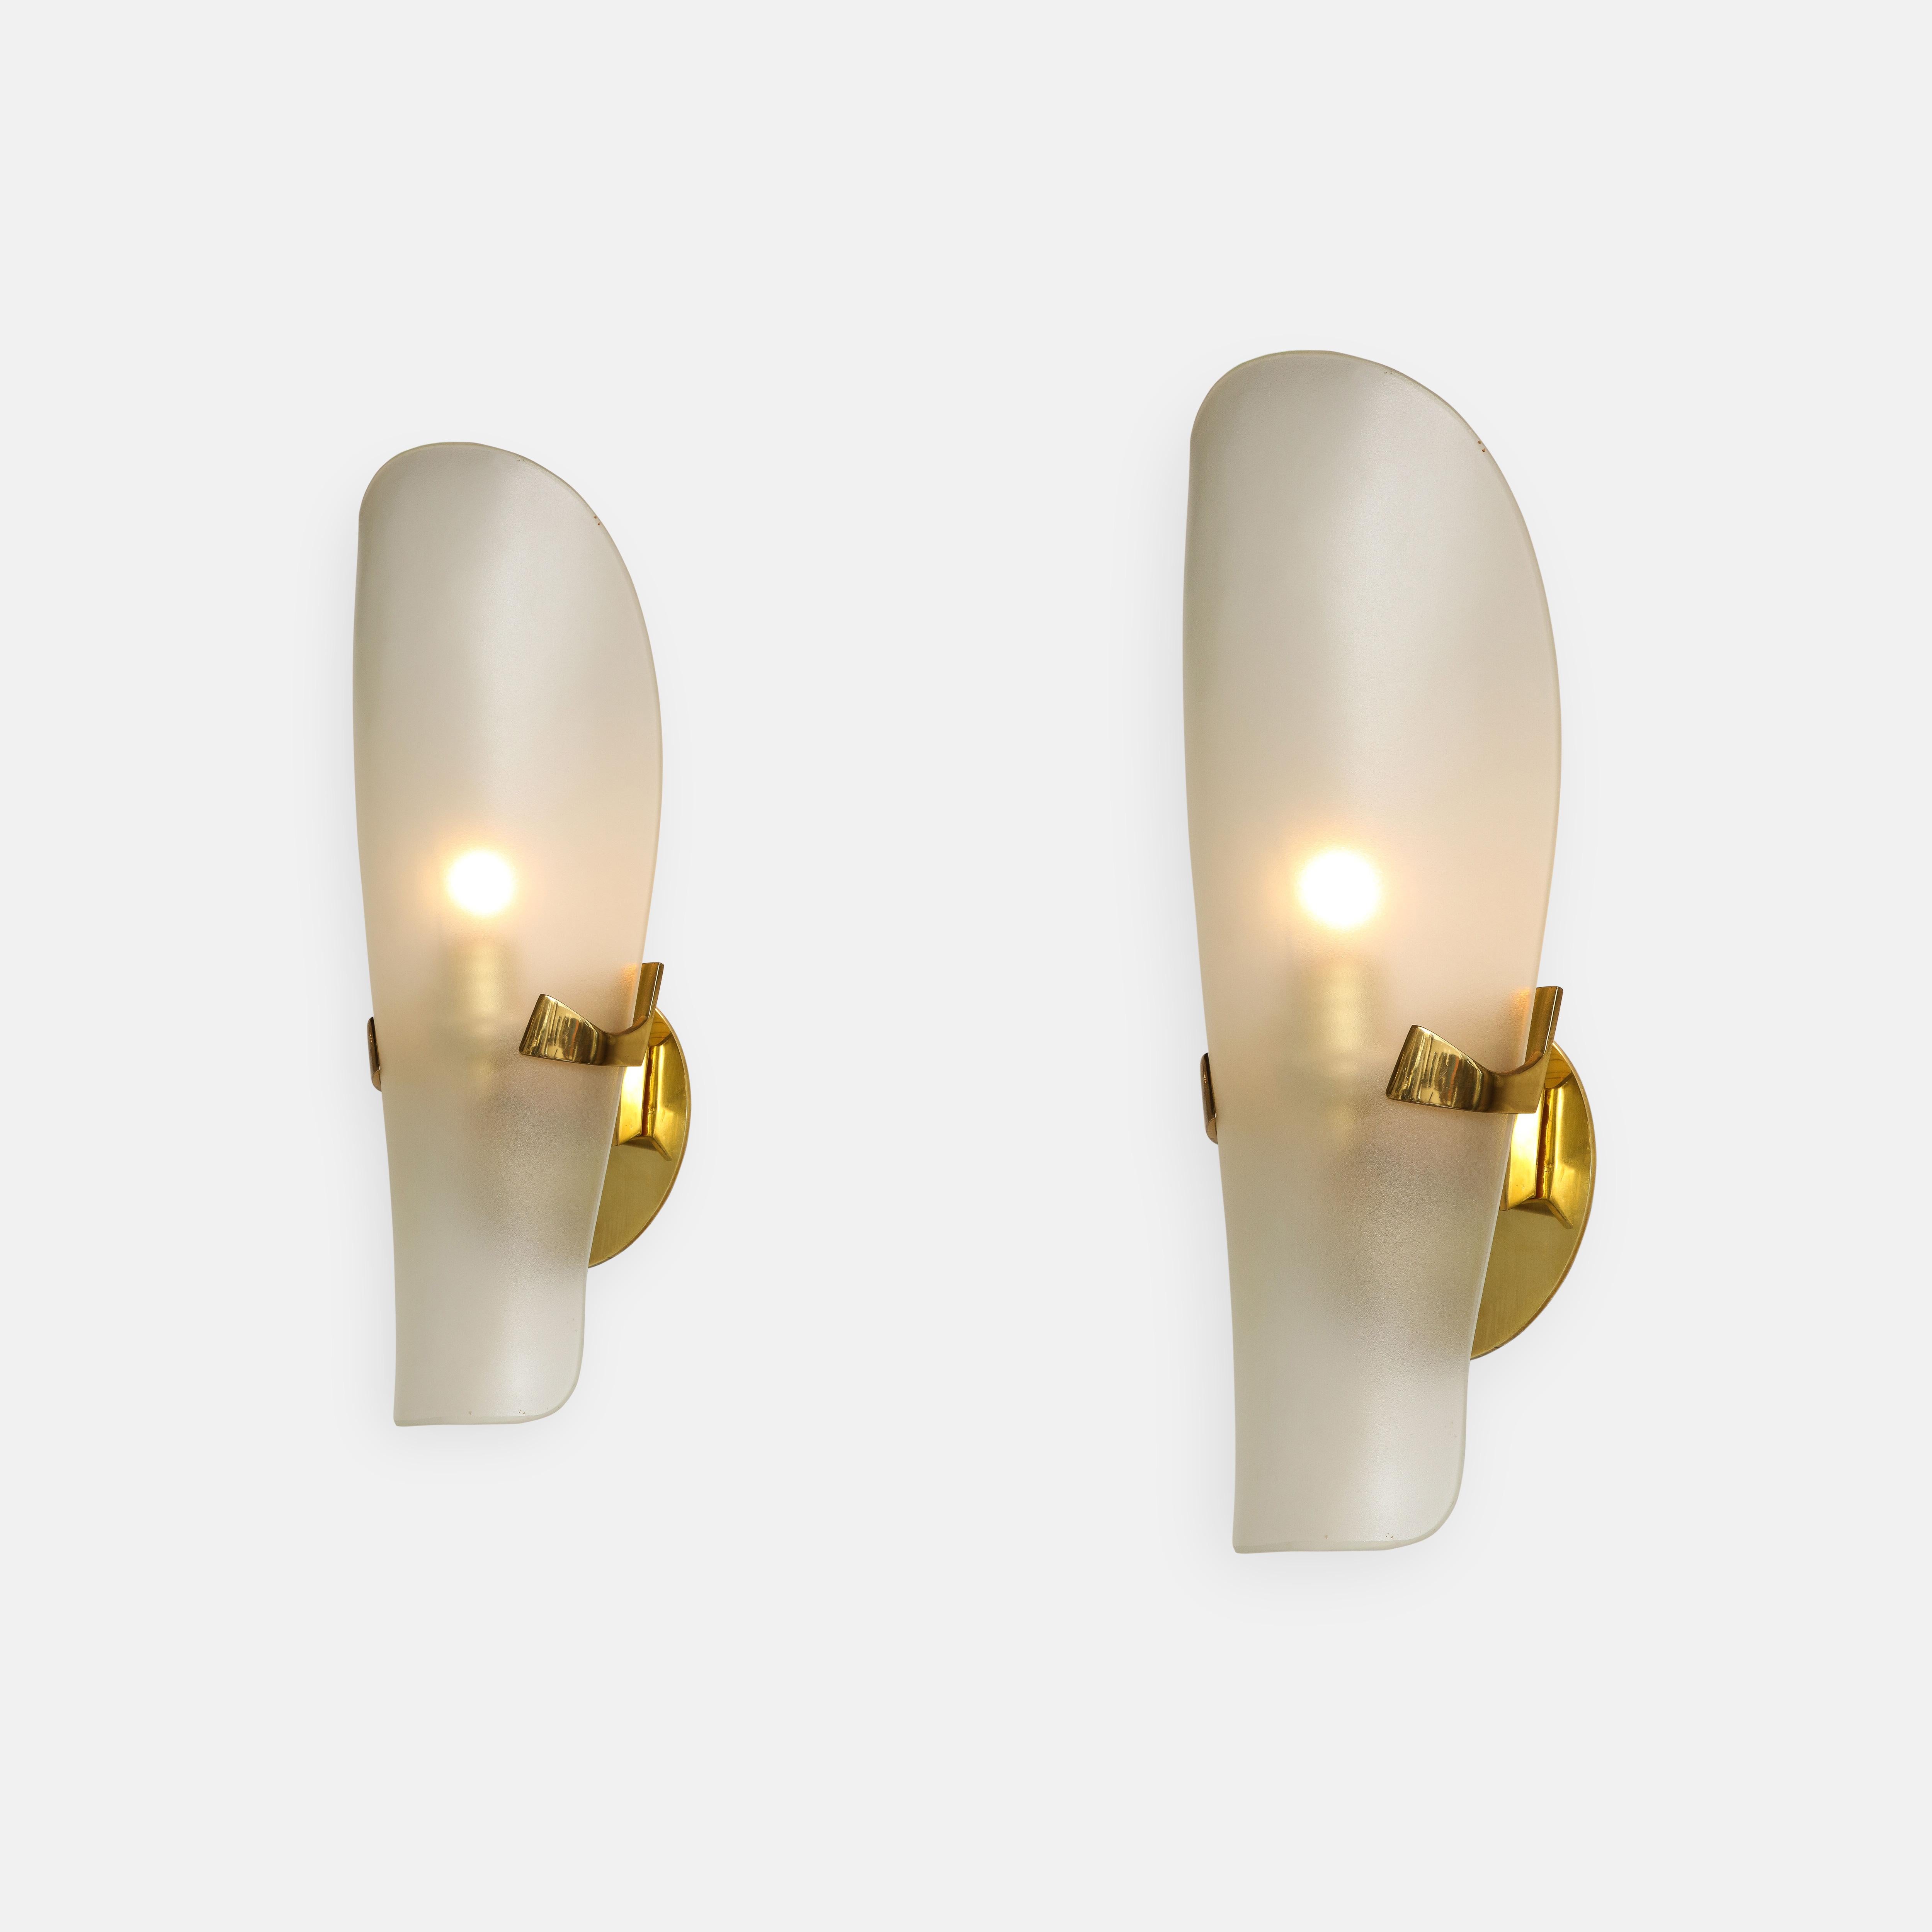 Max Ingrand for Fontana Arte rare pair of sconces model 1636 with curved shield-shaped satin or acid-etched glass diffuser on brass mounts. 
Newly rewired to U.S. standards with custom backplates.

Literature:
Fontana Arte, manufacturer's